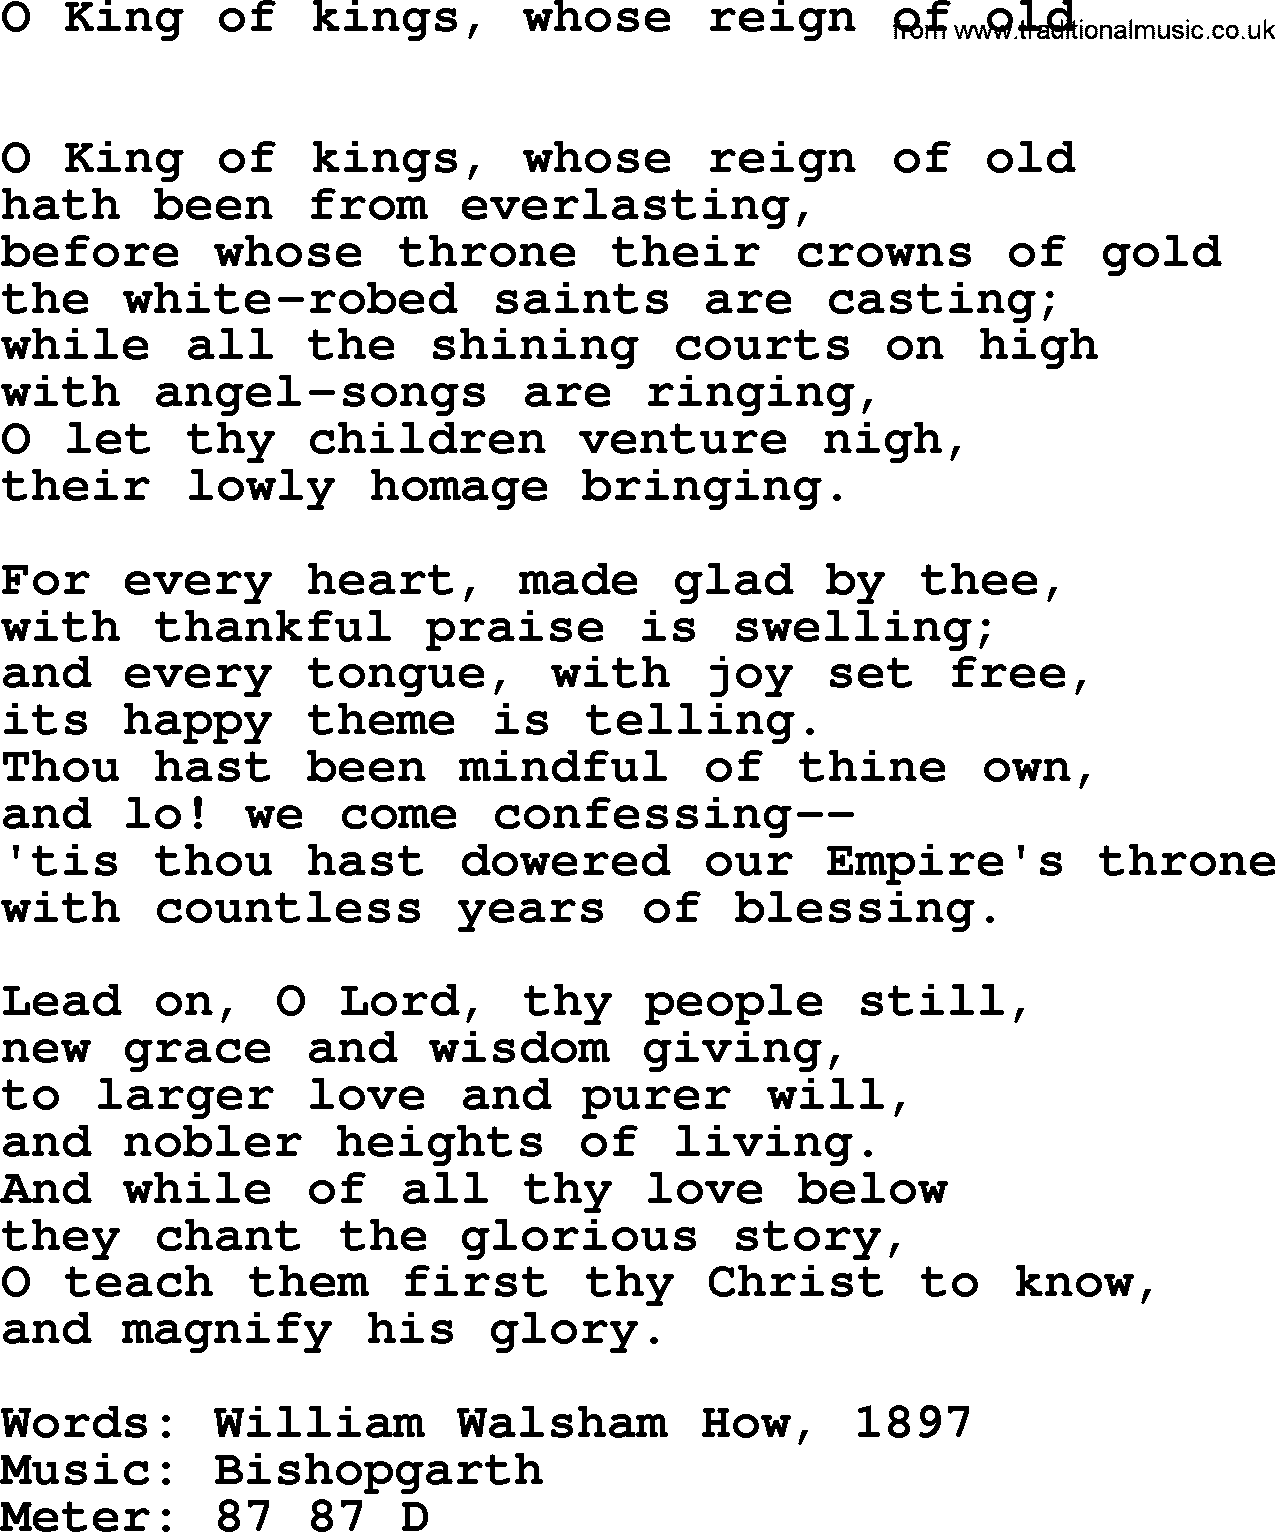 Book of Common Praise Hymn: O King Of Kings, Whose Reign Of Old.txt lyrics with midi music